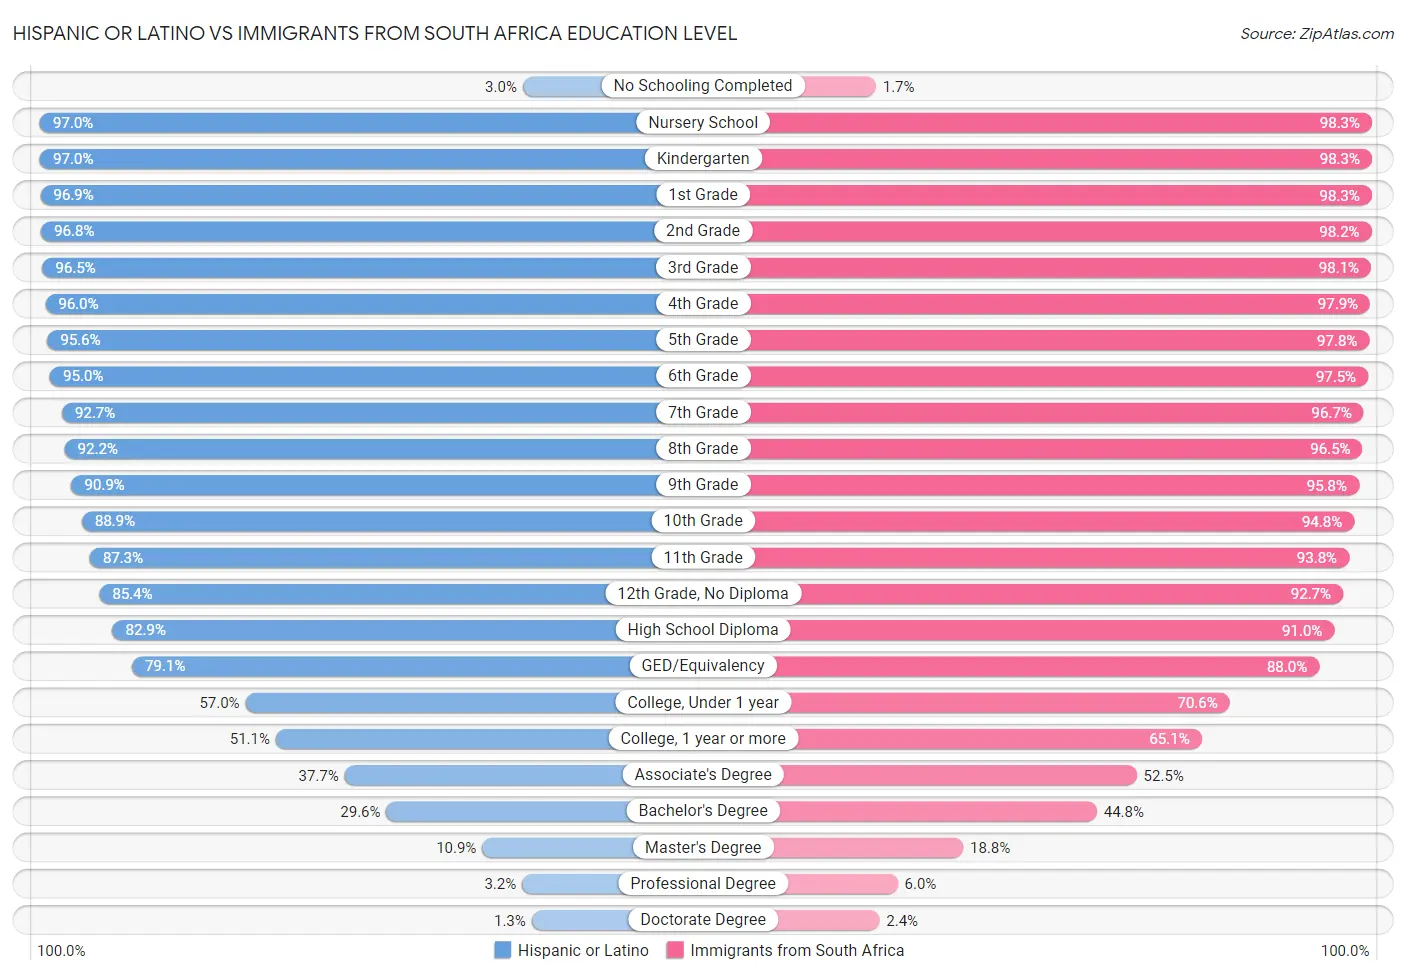 Hispanic or Latino vs Immigrants from South Africa Education Level